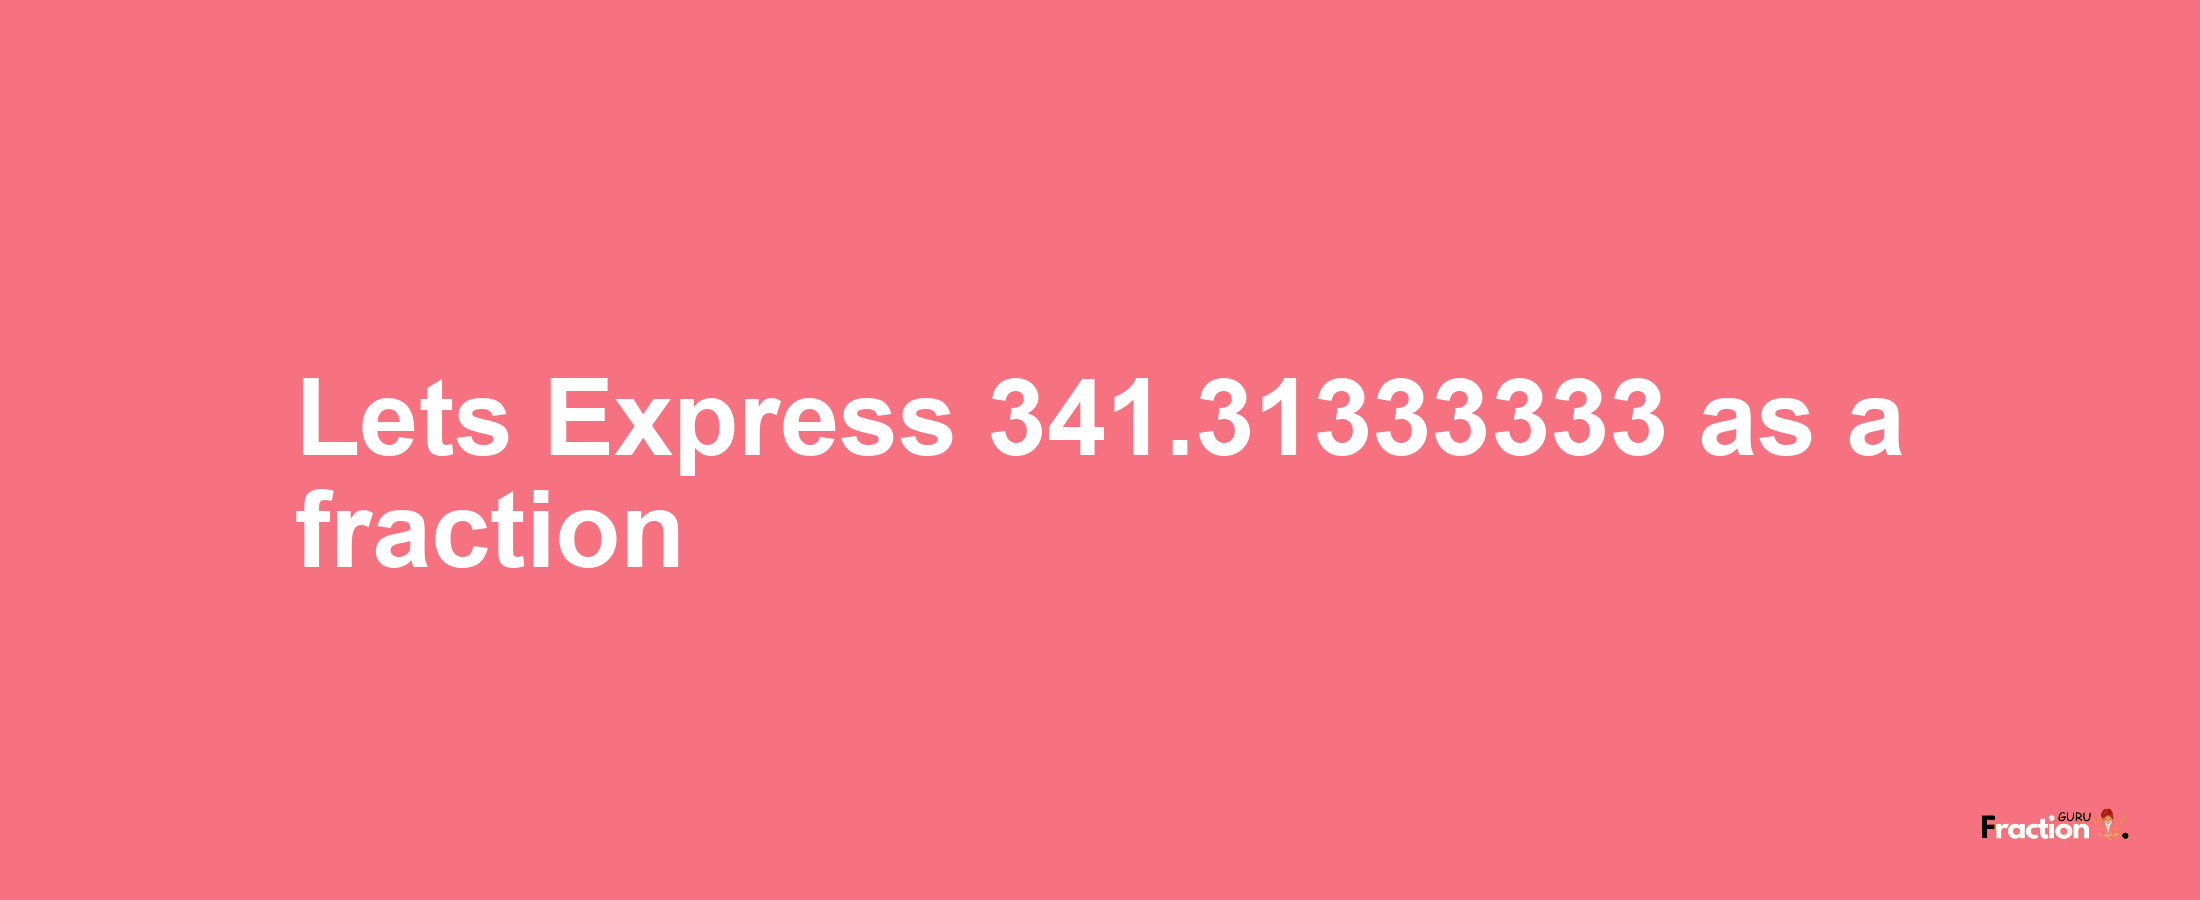 Lets Express 341.31333333 as afraction